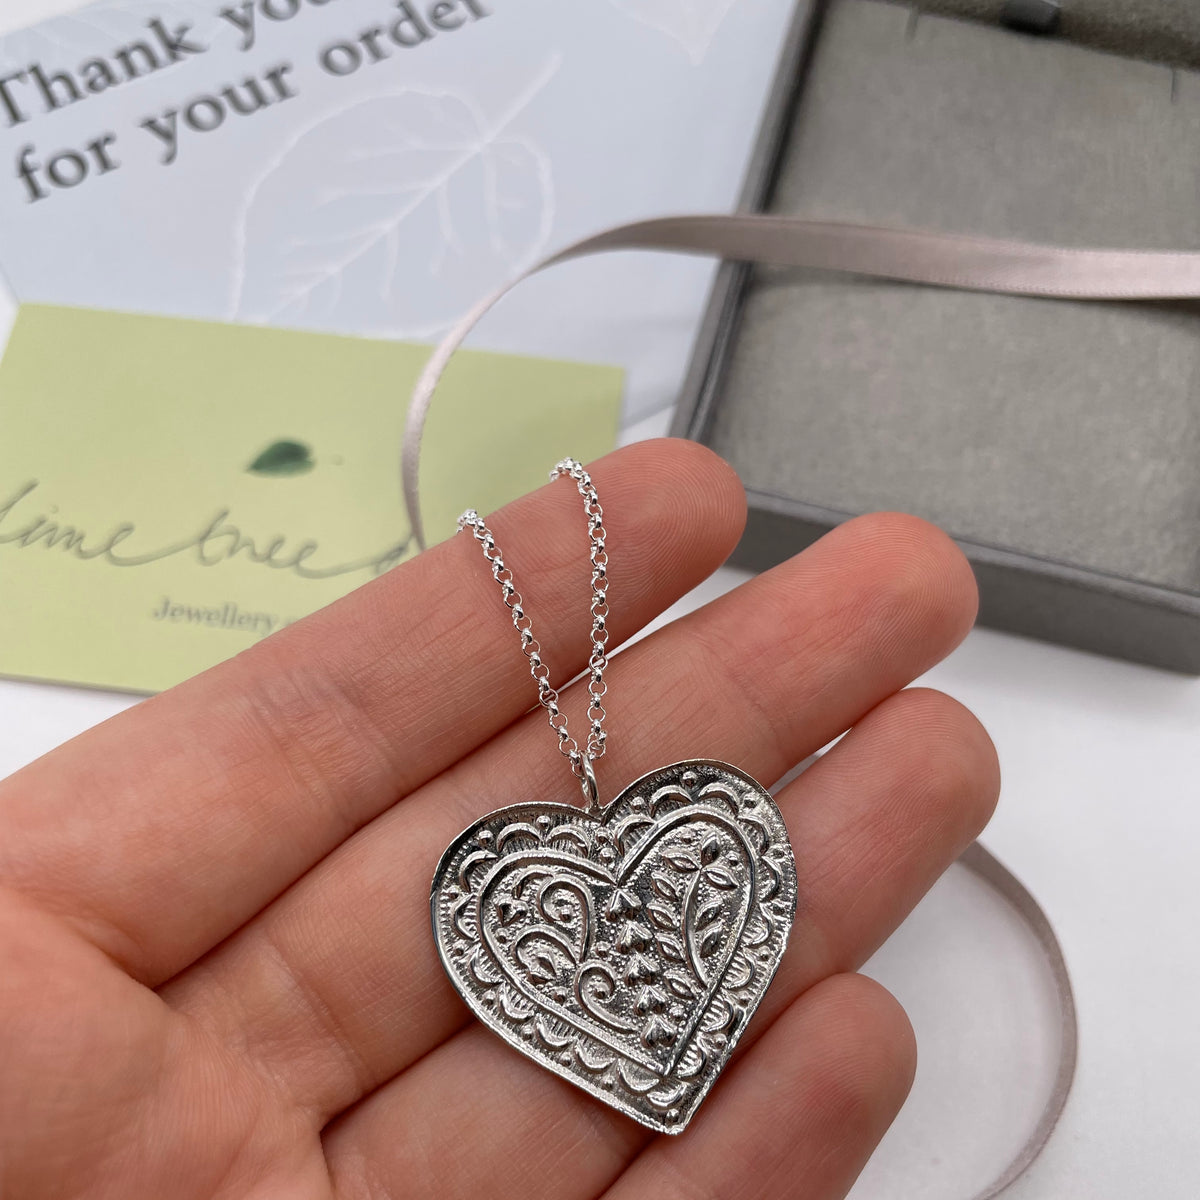 CHIEKO＋ heart necklace ハートネックレス 白-